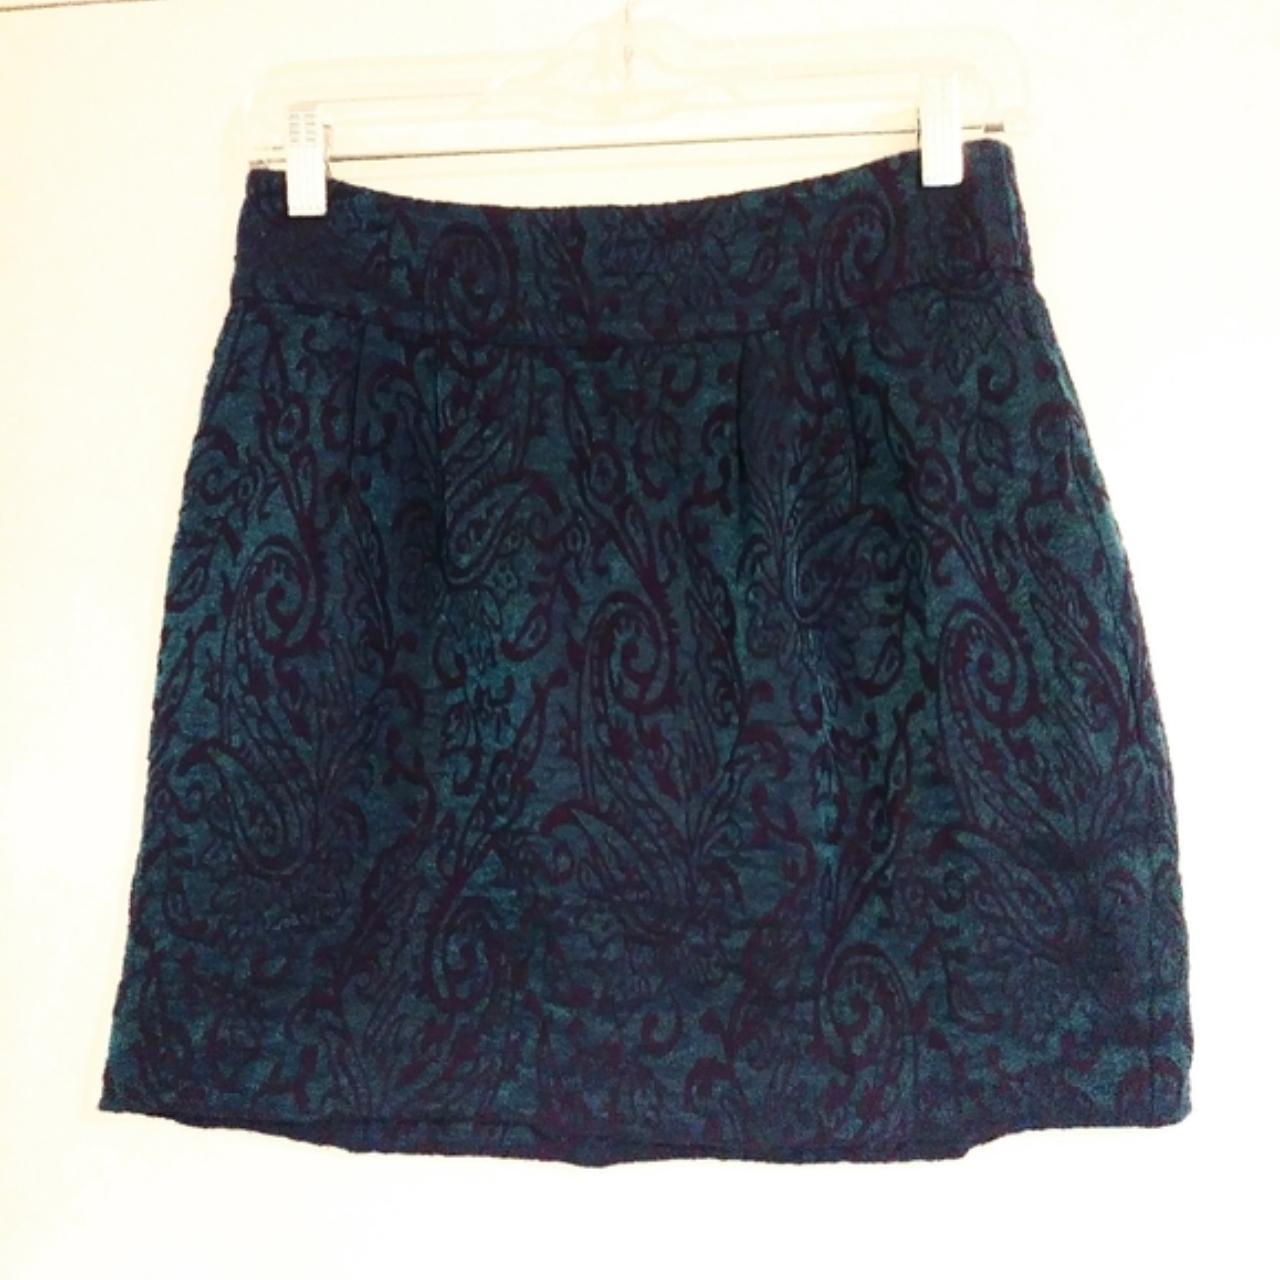 Urban Outfitters Women's Blue and Purple Skirt | Depop